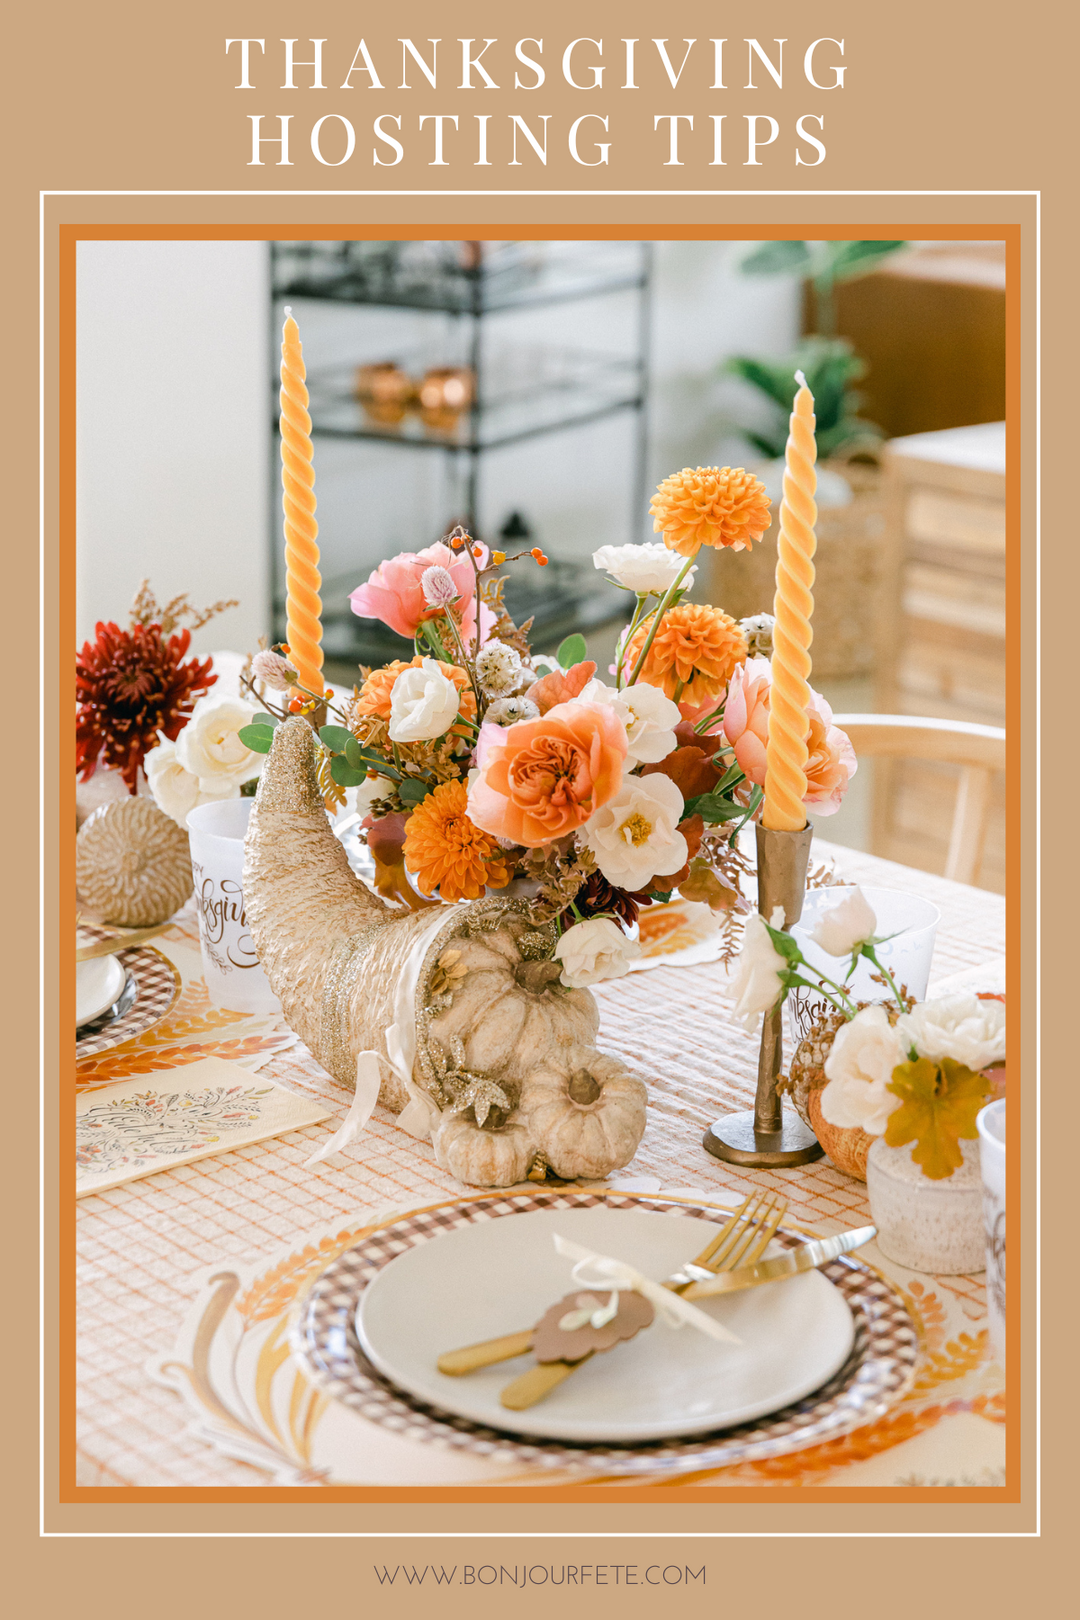 THANKSGIVING TABLE DECOR IDEAS & HOLIDAY HOSTING TIPS